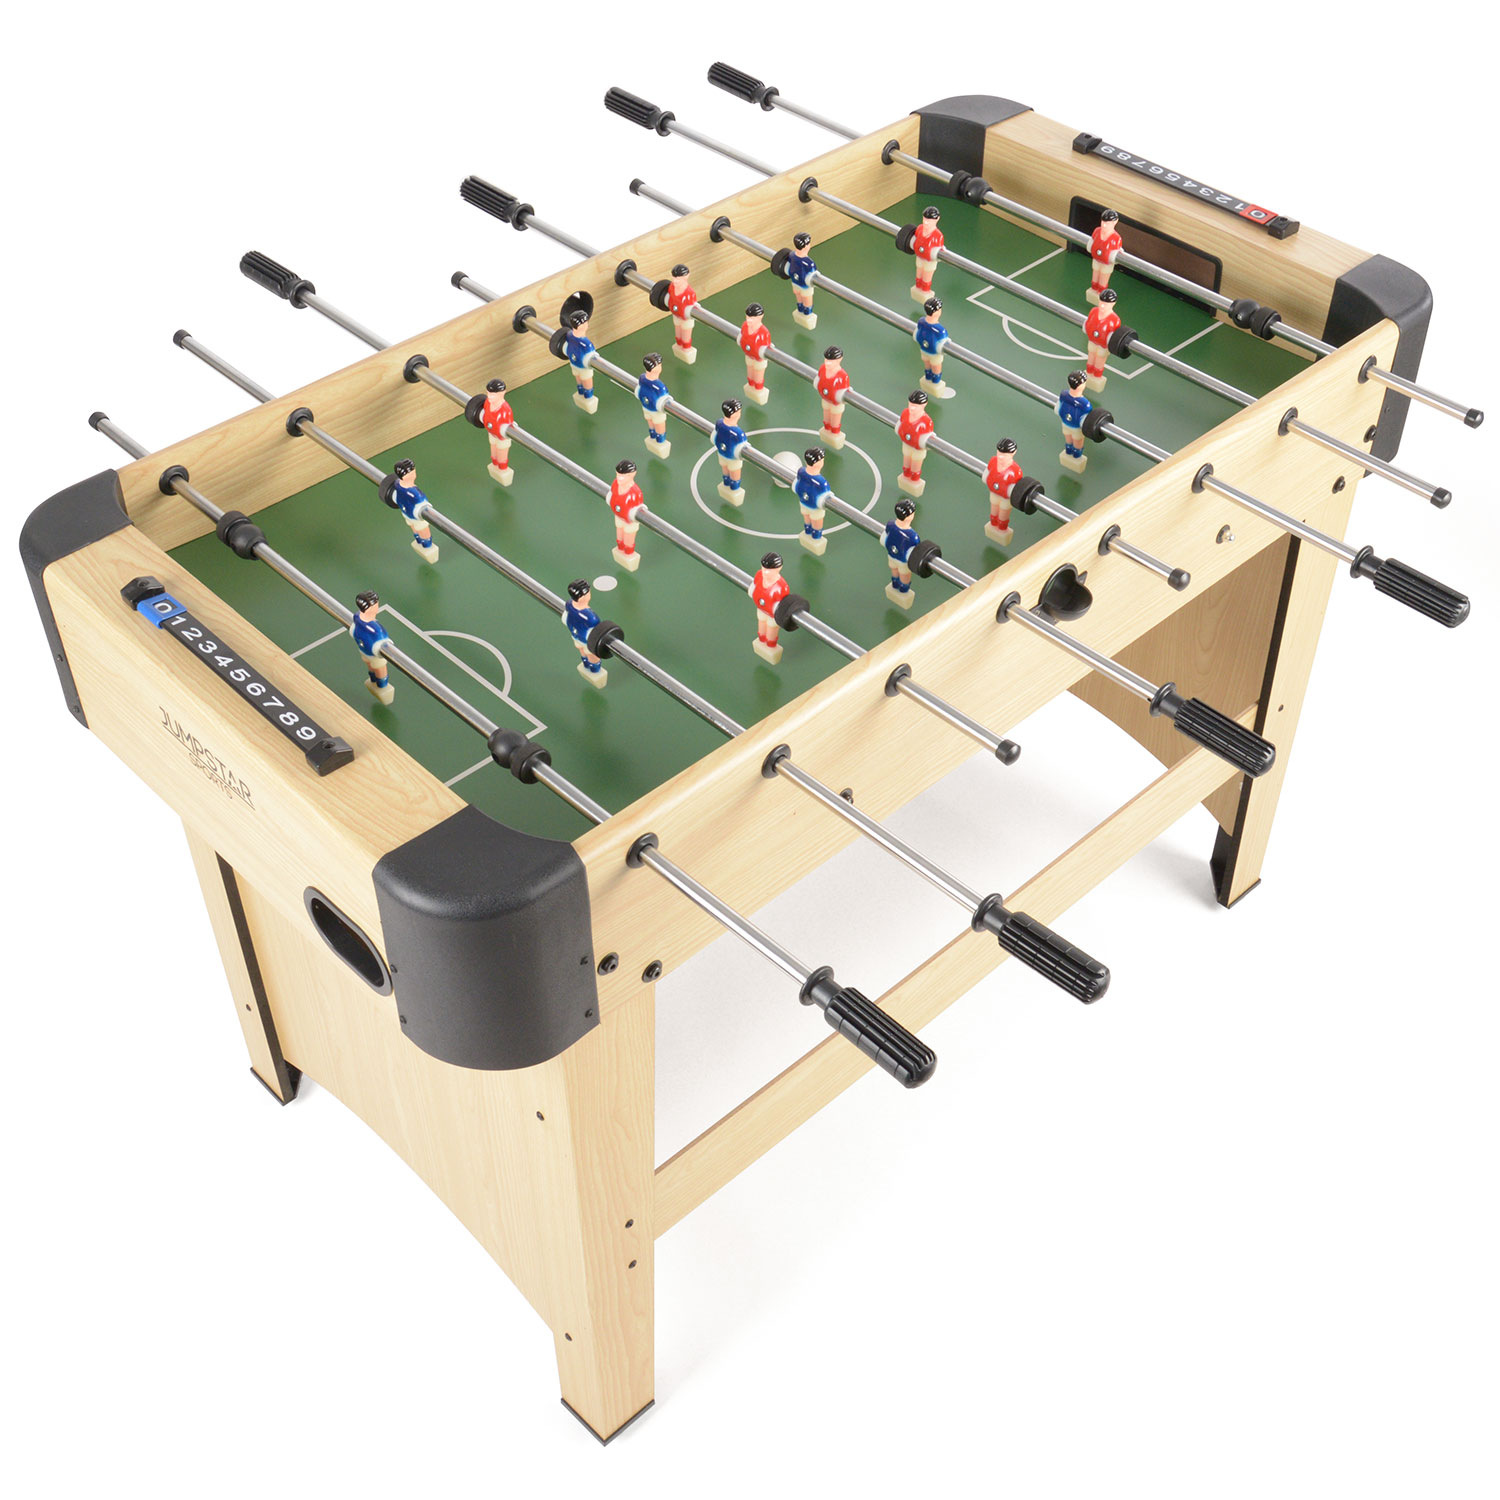 JumpStar 4ft Football Table Sports Games Tabletop Full Size Wooden ...